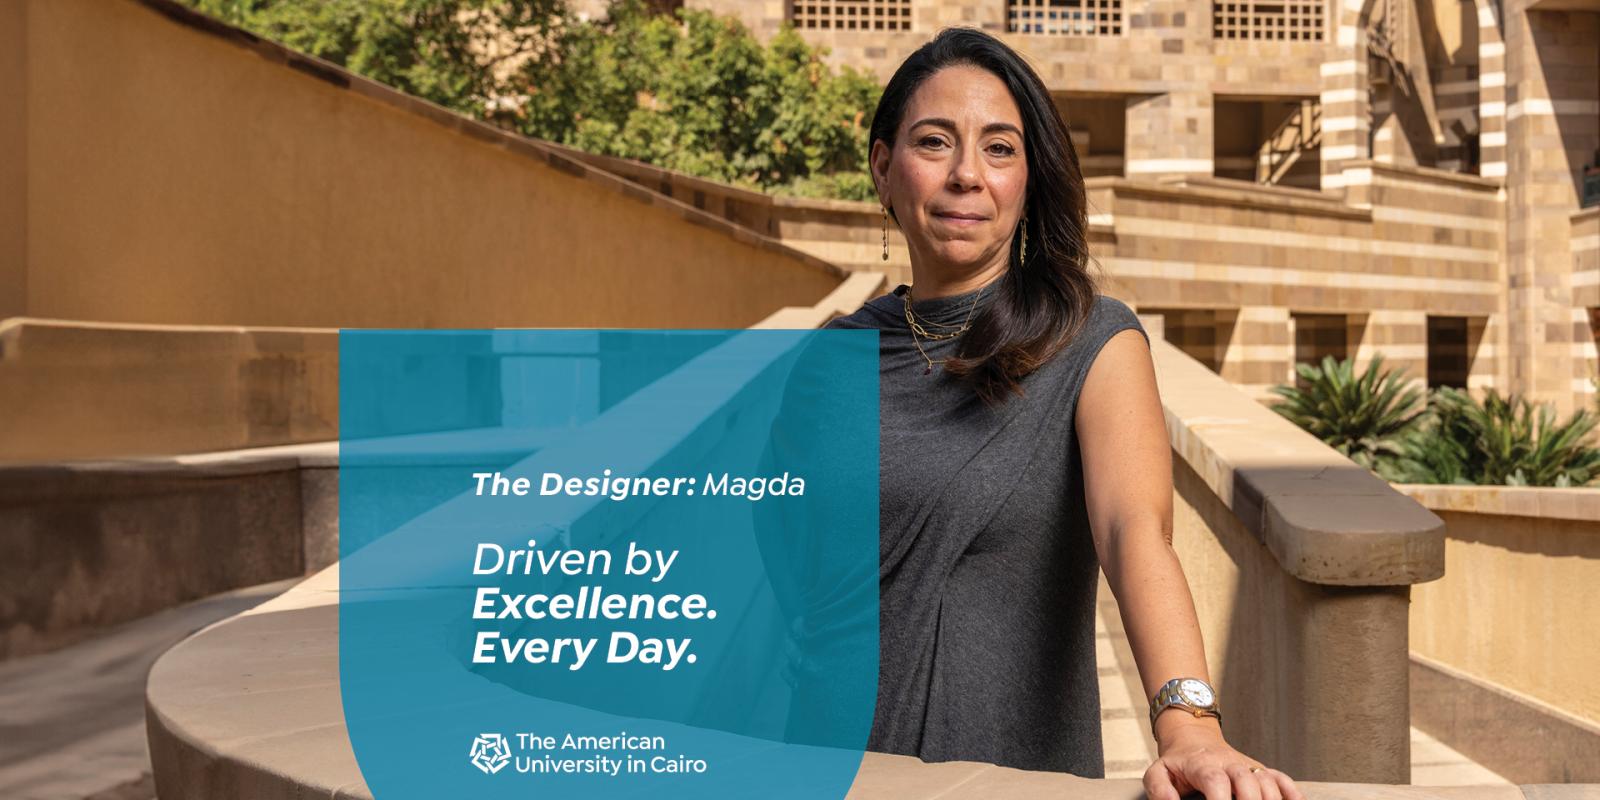 A woman standing in the middle of a building, text reads "The Designer: Magda. Driven by Excellence. Every Day. The American University in Cairo"